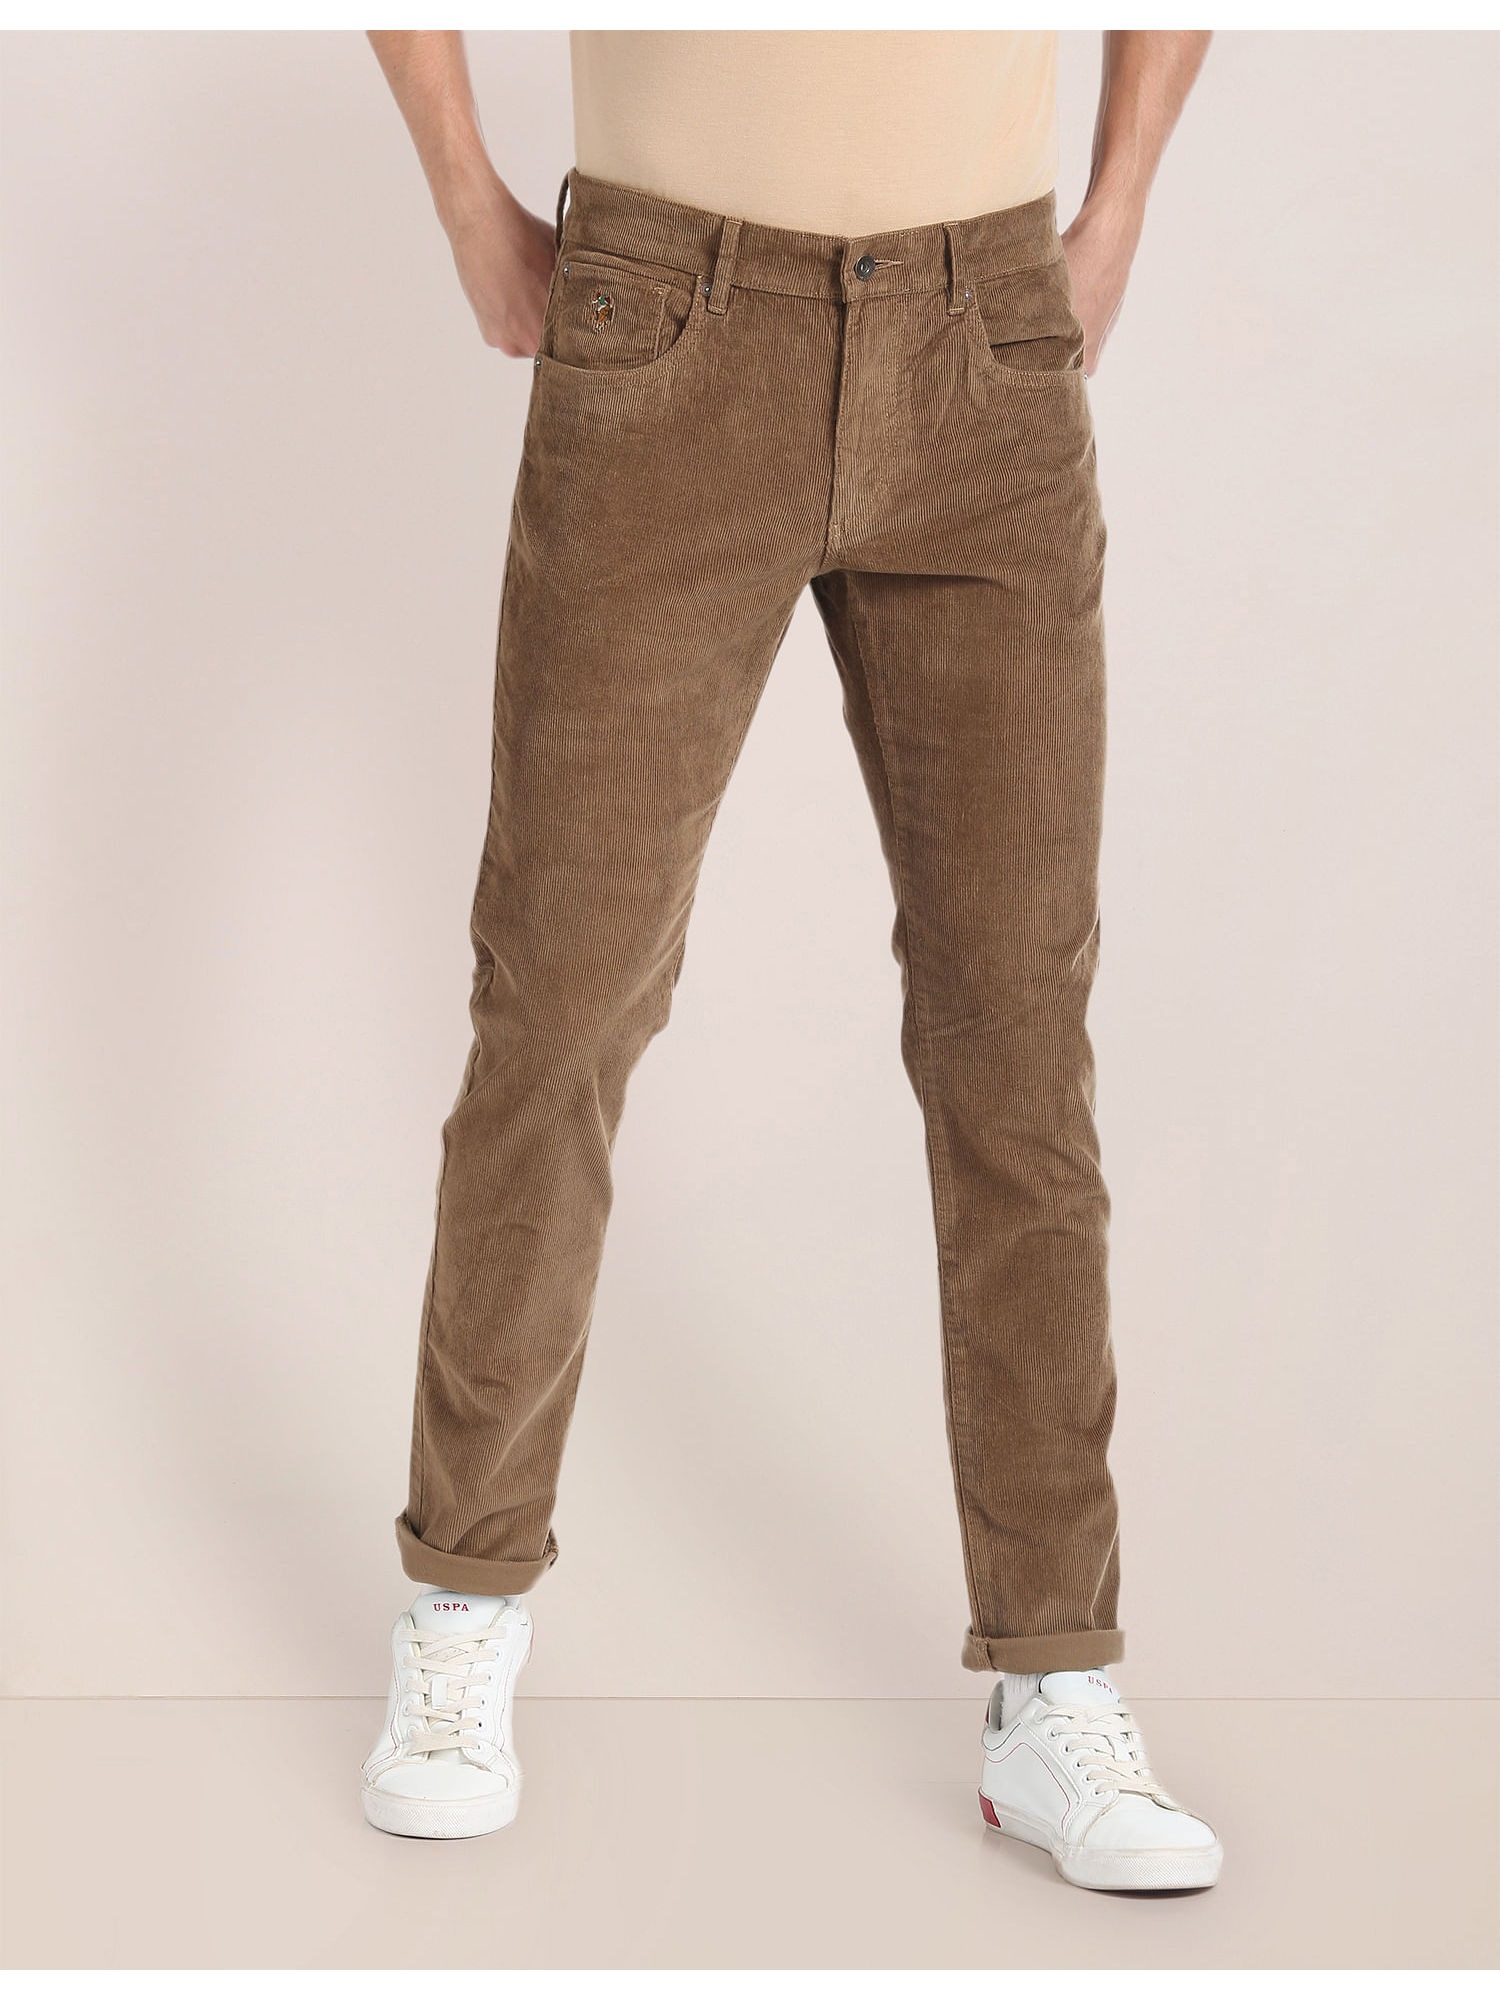 Buy U.S. POLO ASSN. Mens Regular Fit Solid Trousers | Shoppers Stop